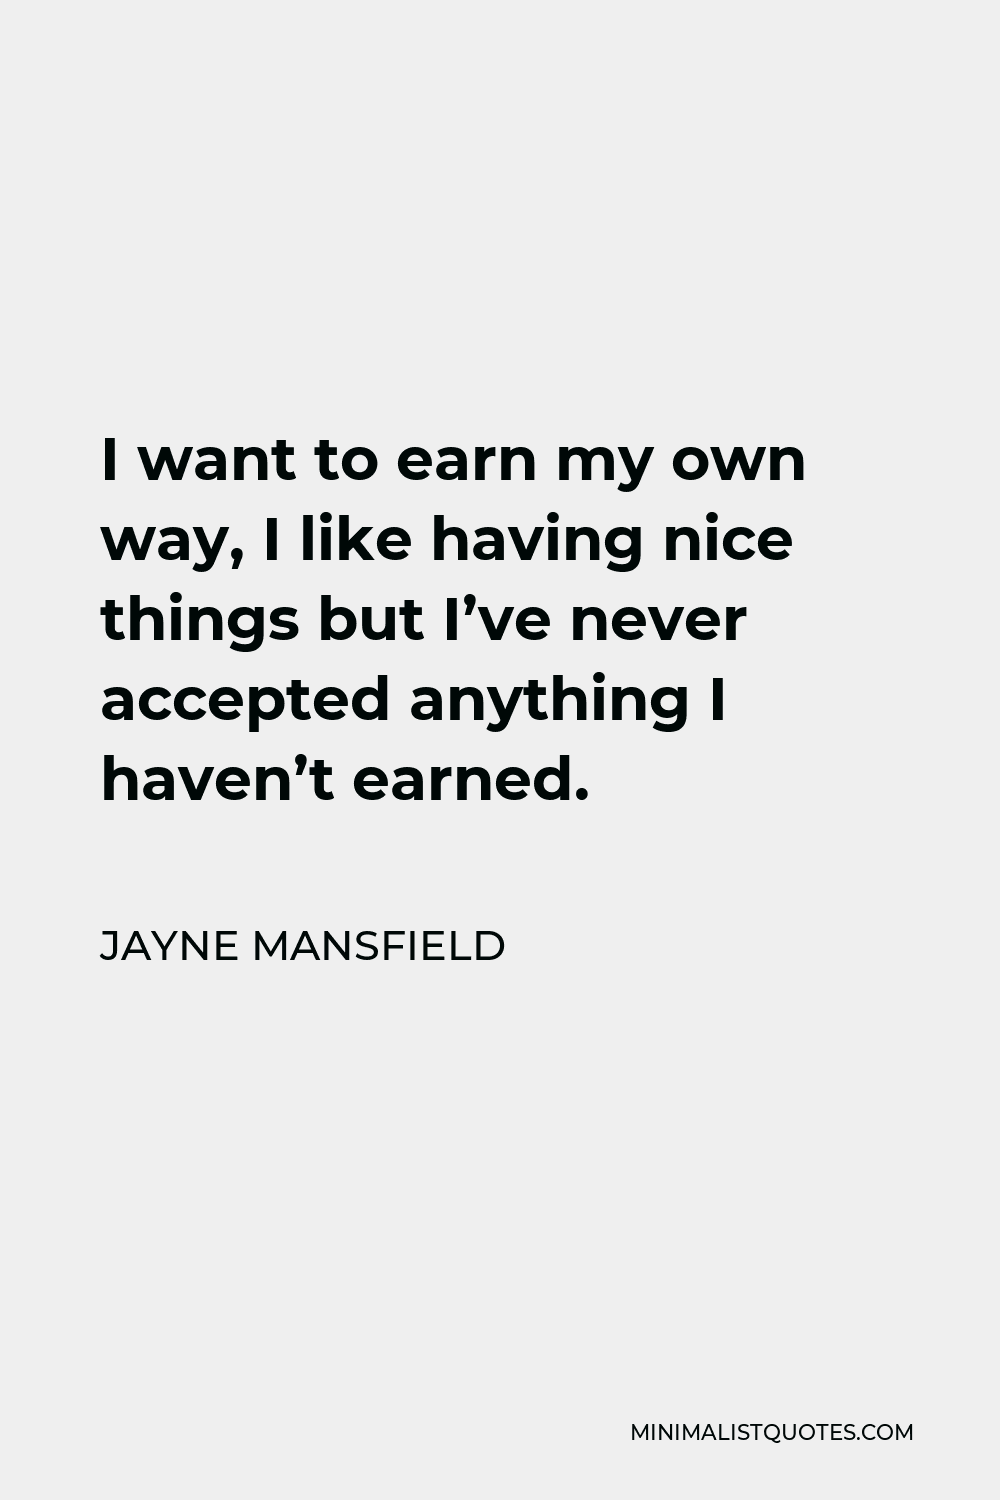 Jayne Mansfield Quote - I want to earn my own way, I like having nice things but I’ve never accepted anything I haven’t earned.